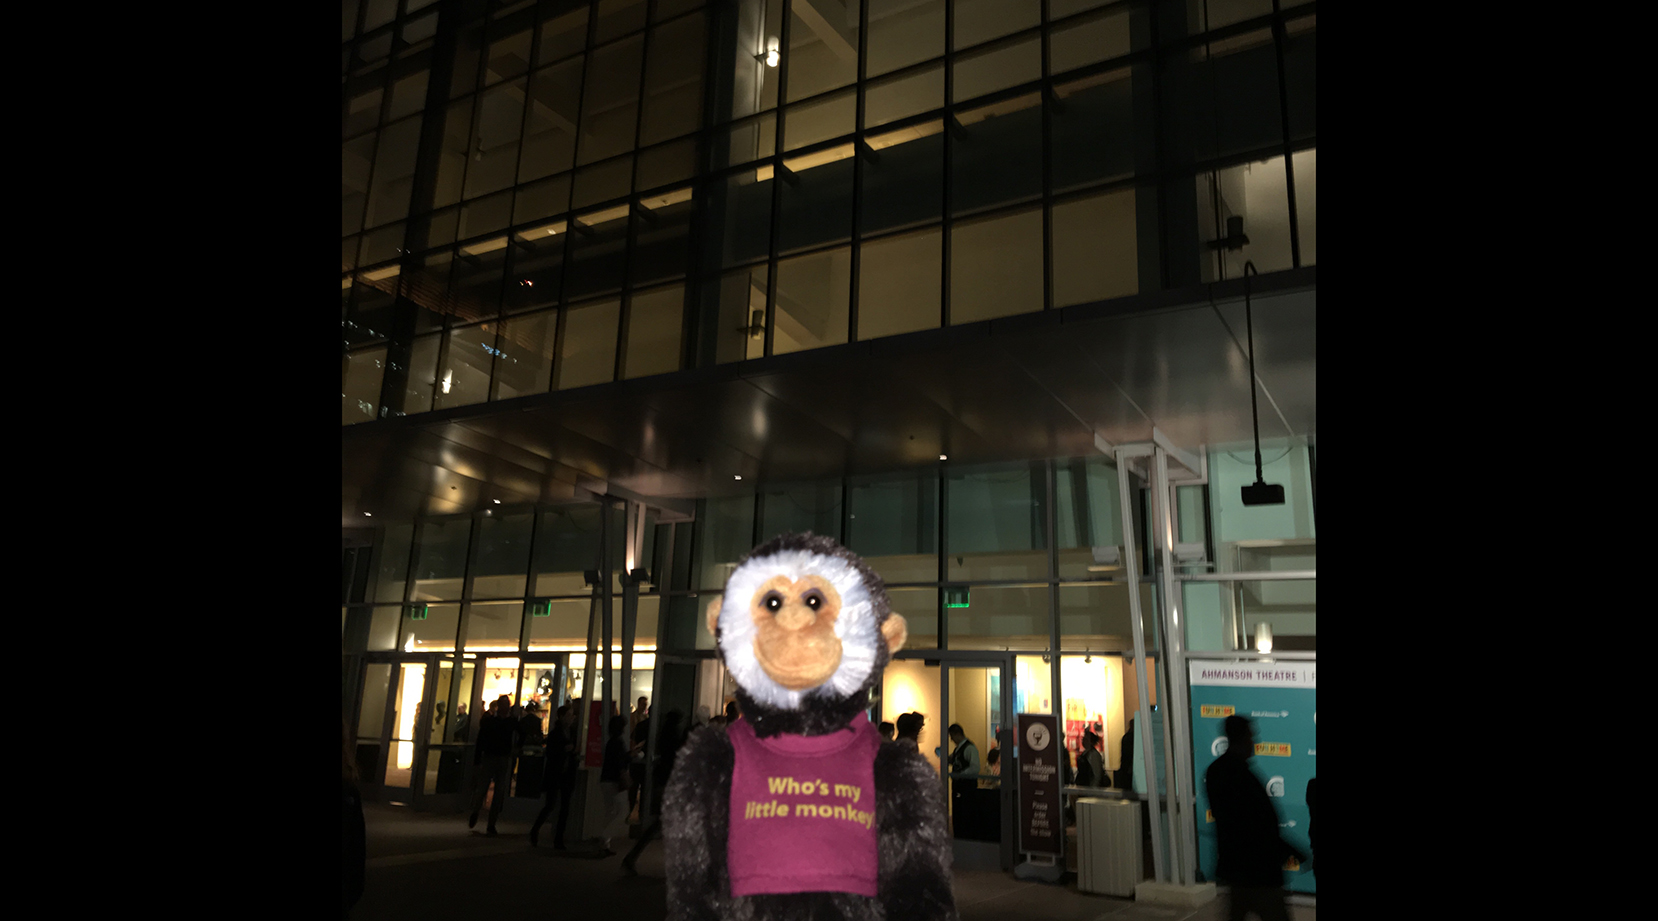 Our social media mascot from The Drowsy Chaperone (Festival 2004) visits the Ahmanson Theatre, where his show had its pre-Broadway tryout!